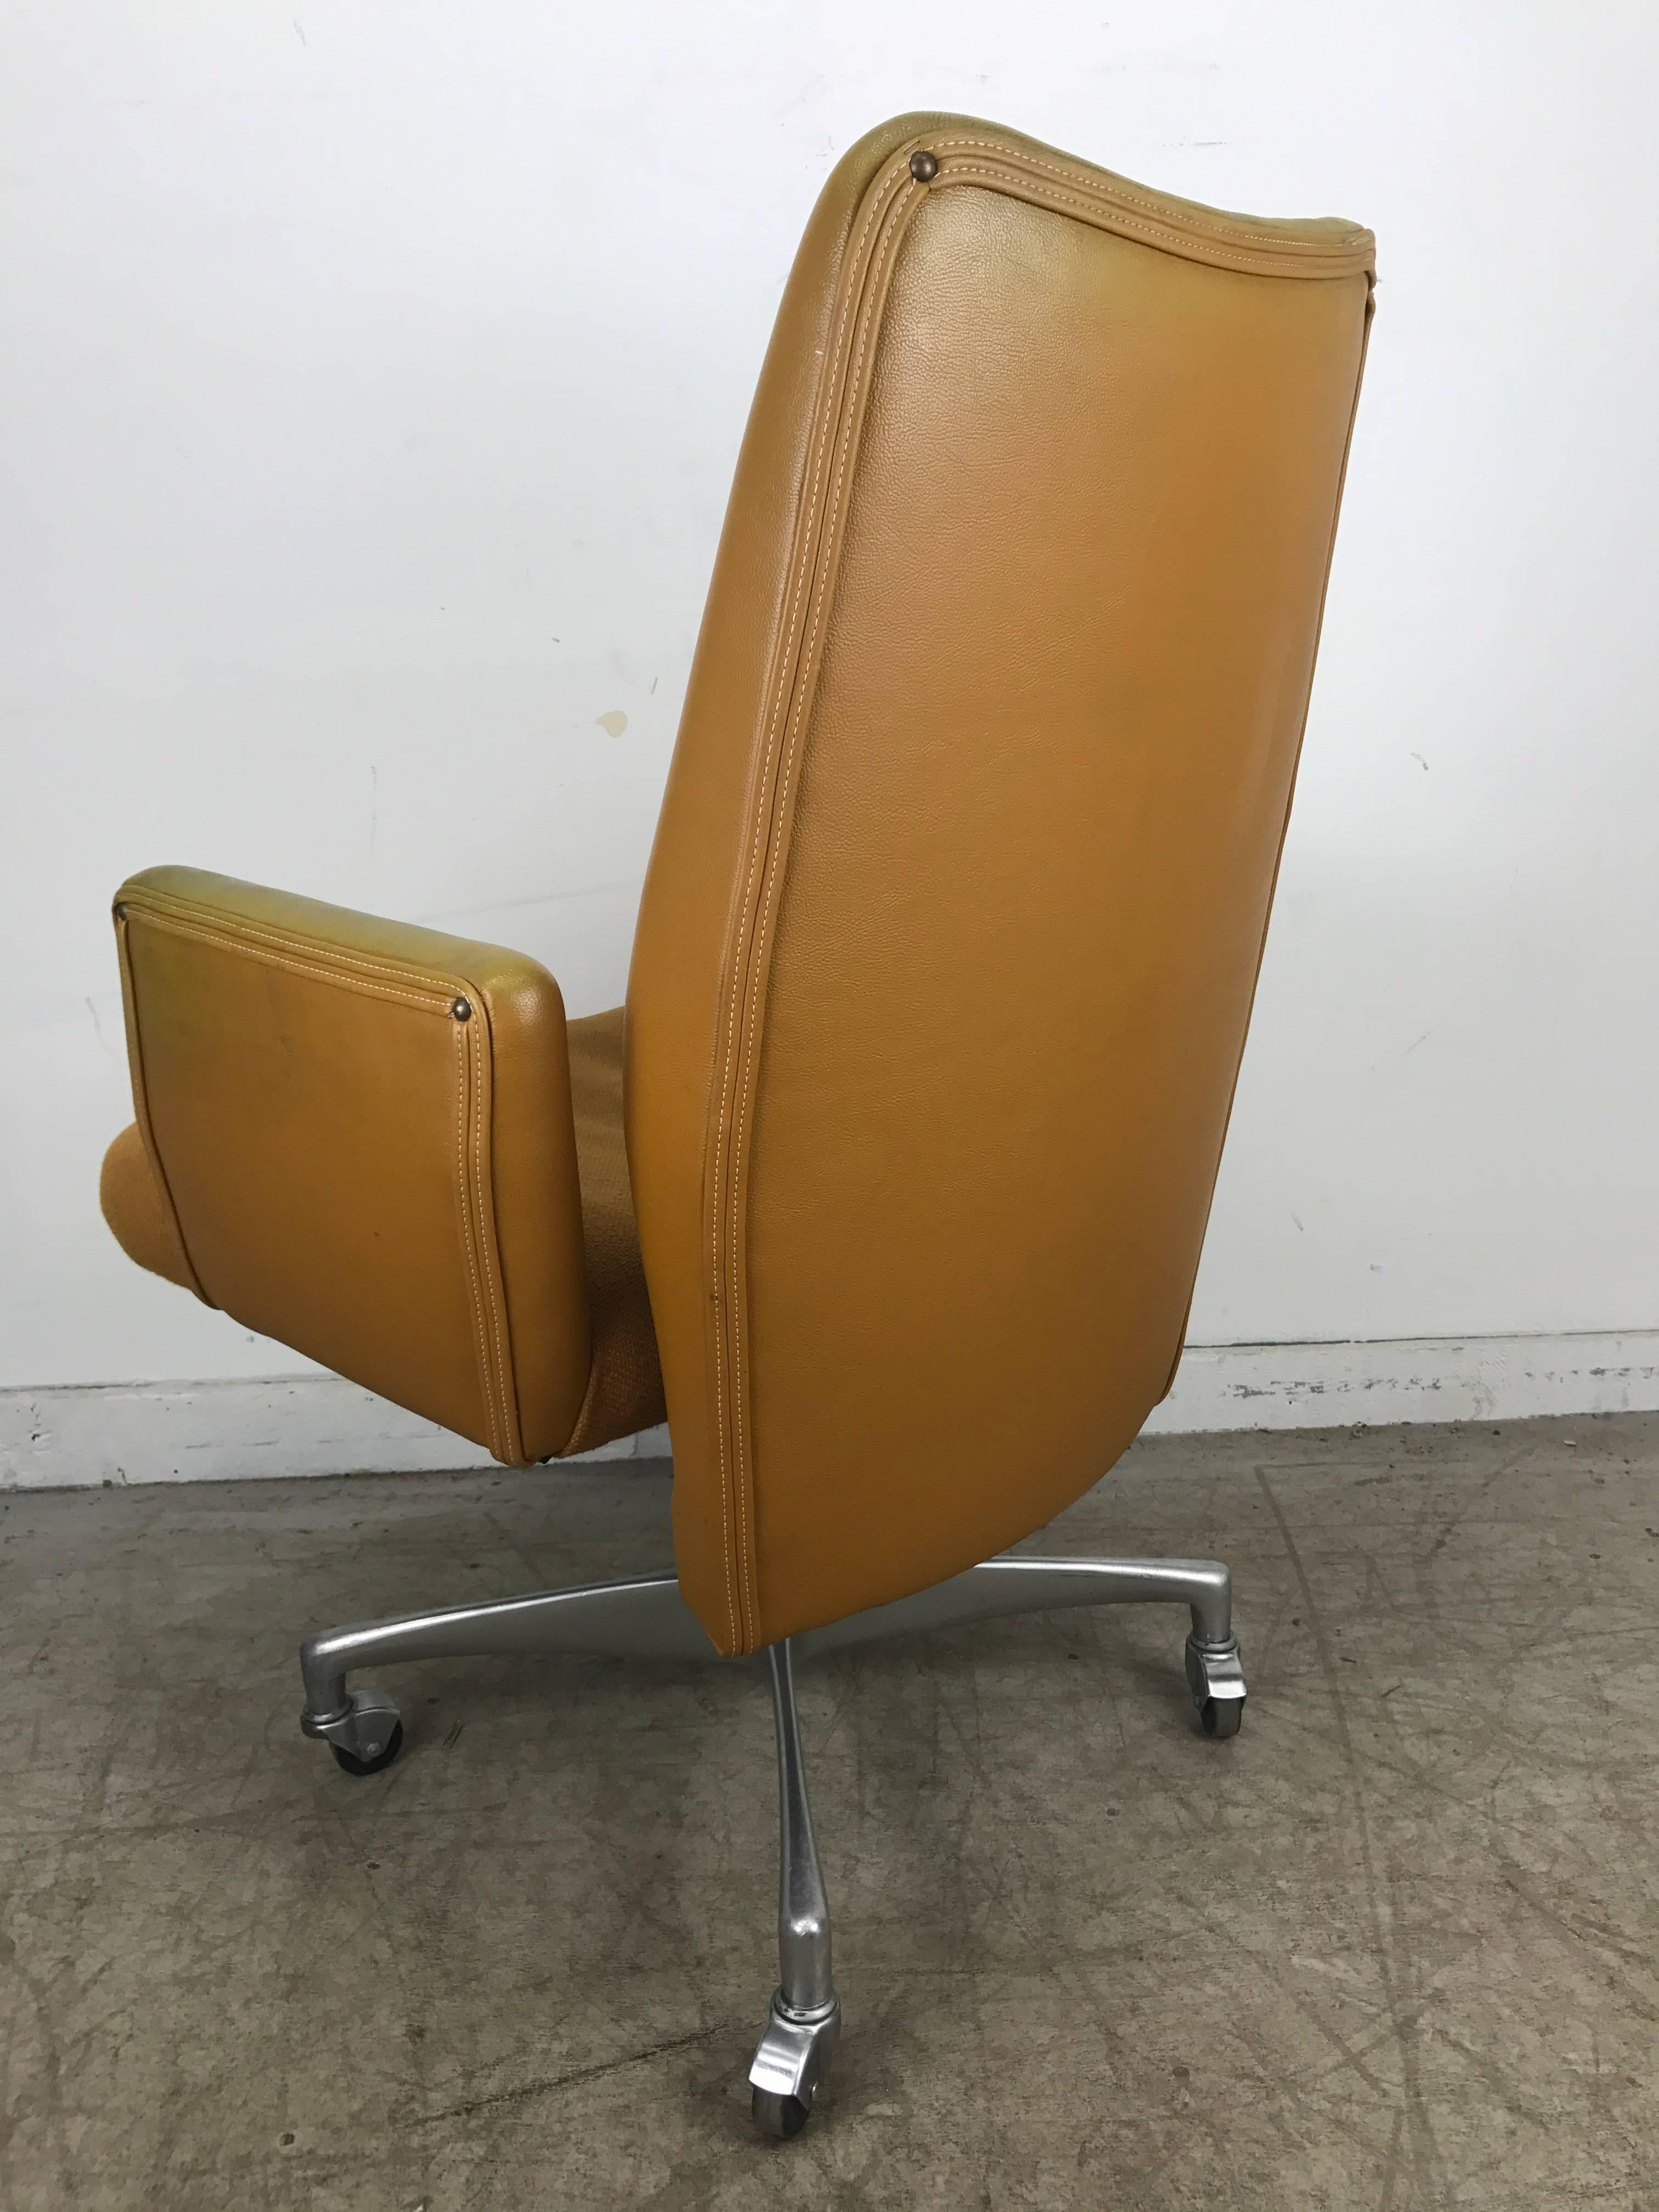 Unusual 1960s modernist executive oversized desk chair. Fully adjustable height. Tilt, swivel, wonderful cast aluminium base on castors, retains original mustard gold naugahyde shell with wool fabric seat, extremely comfortable. Hand delivery avail